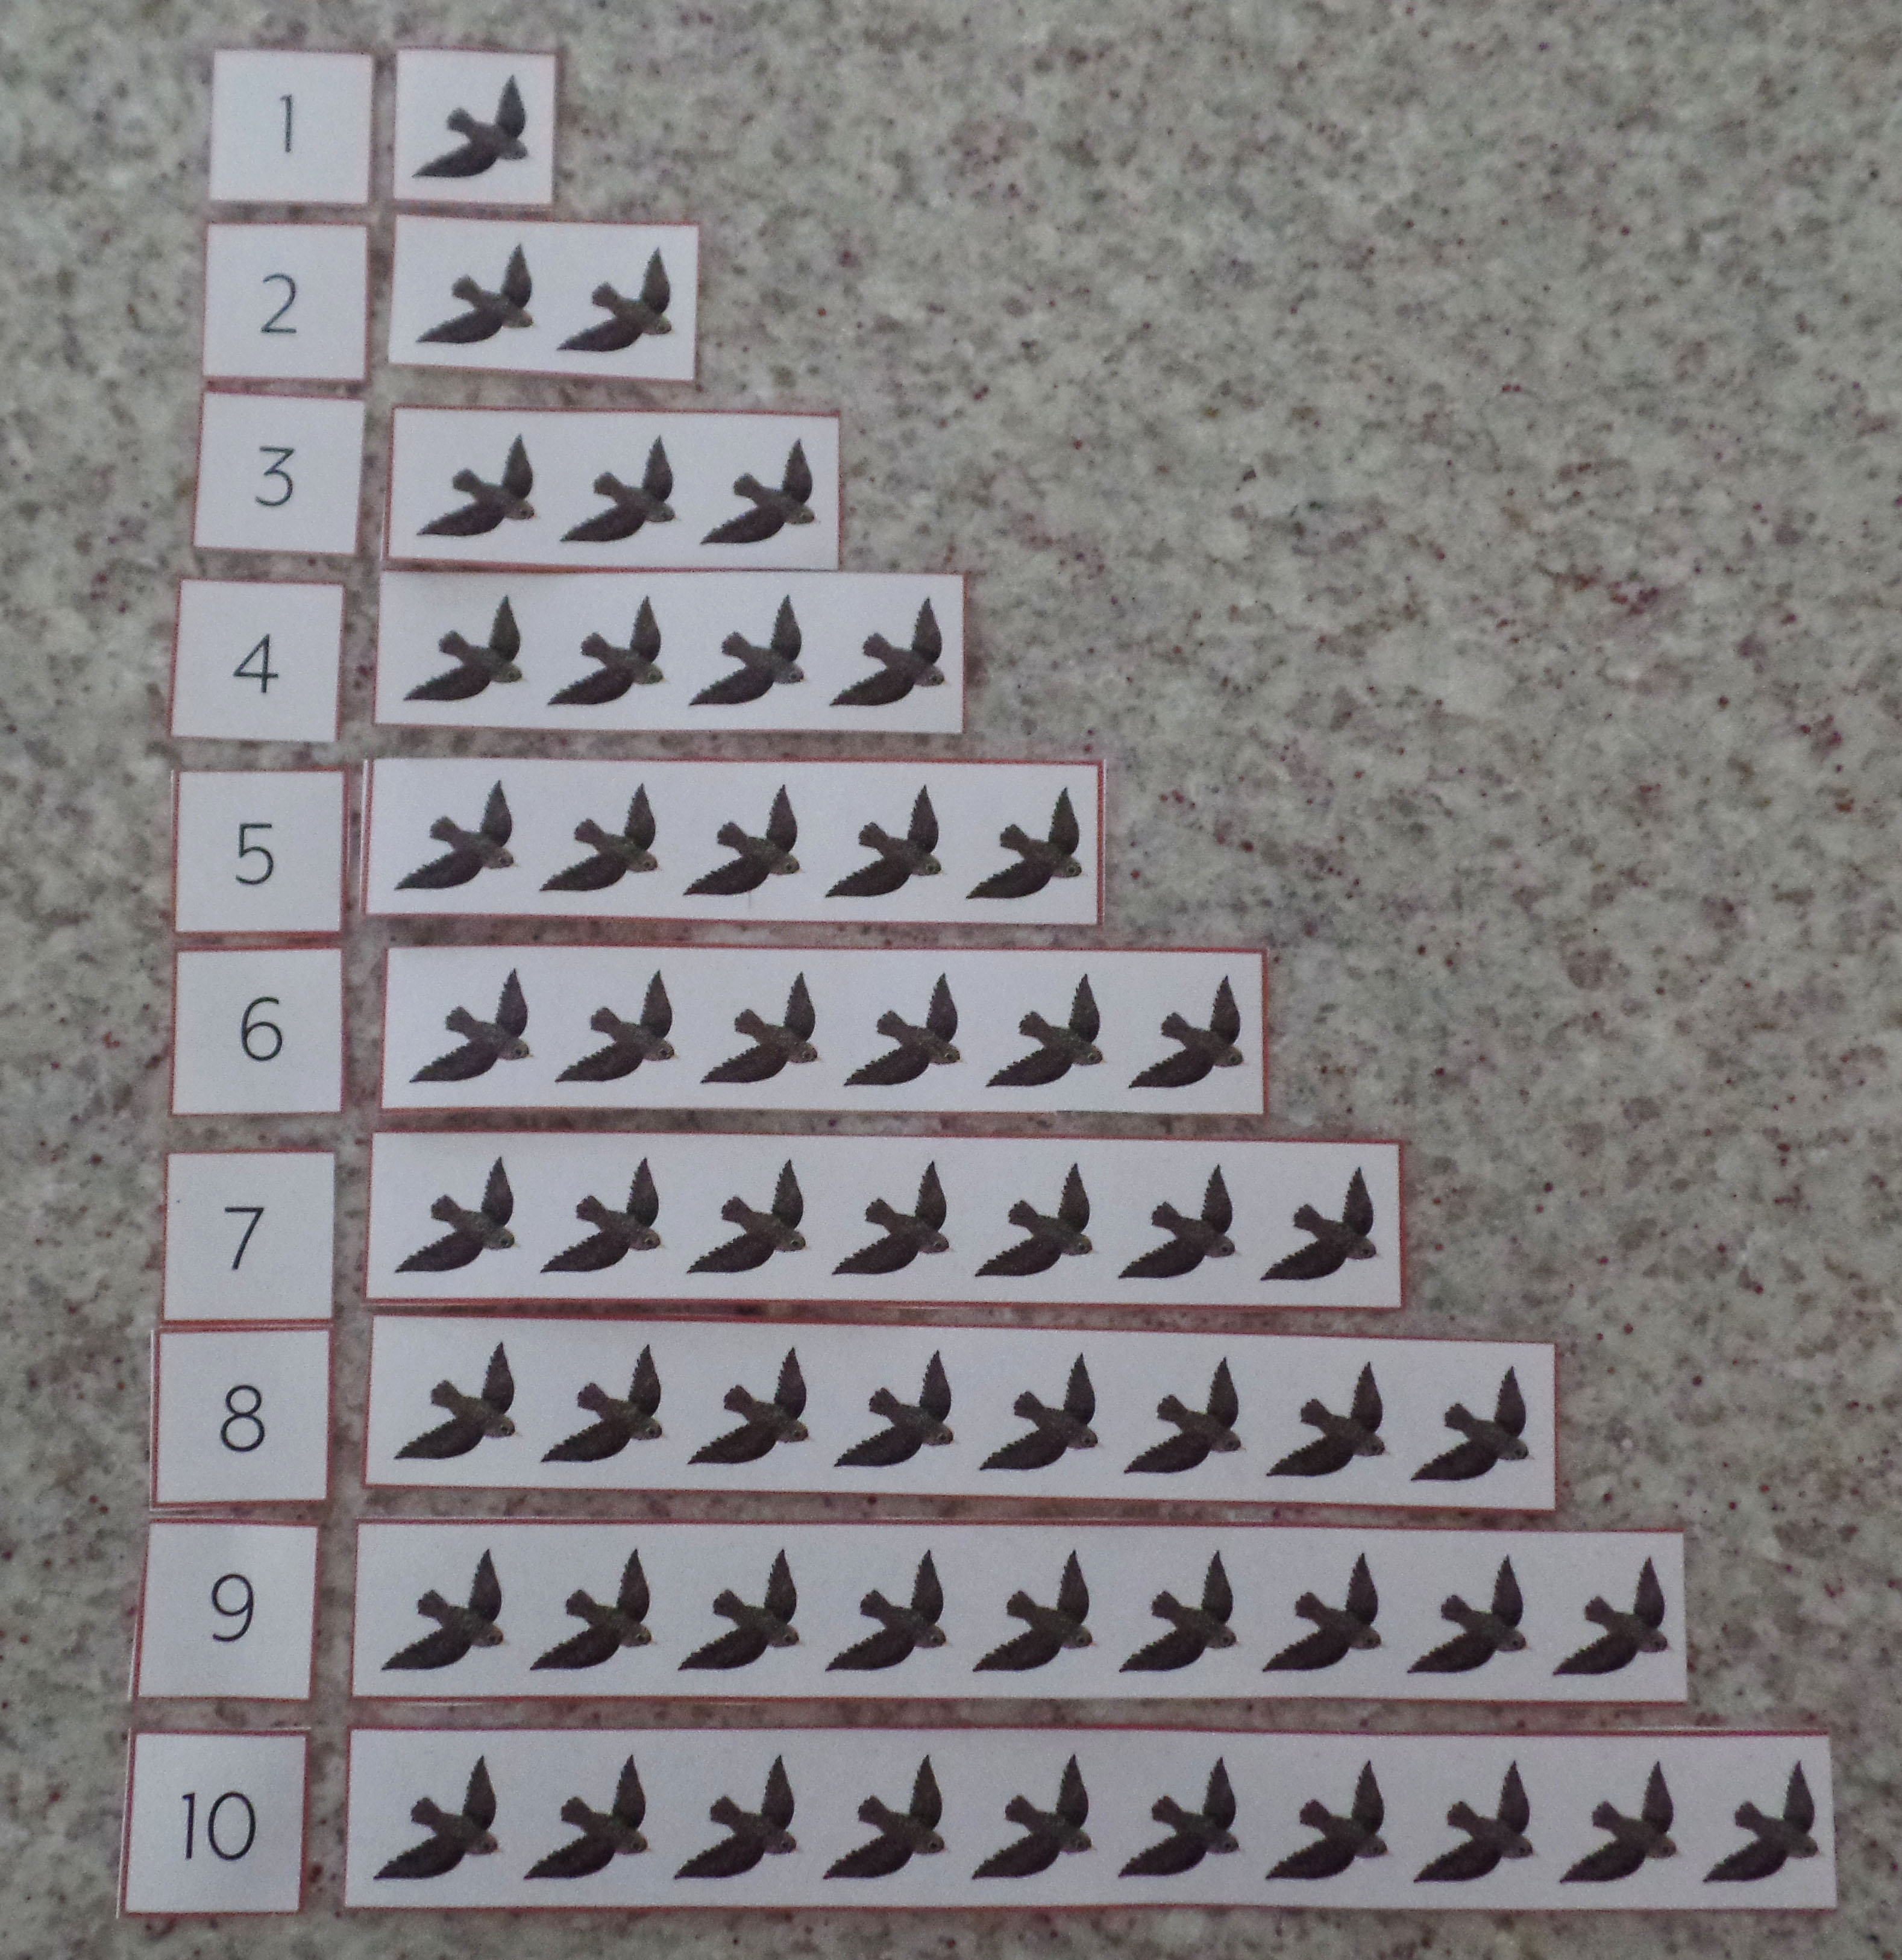 Number sequencing - murmuration